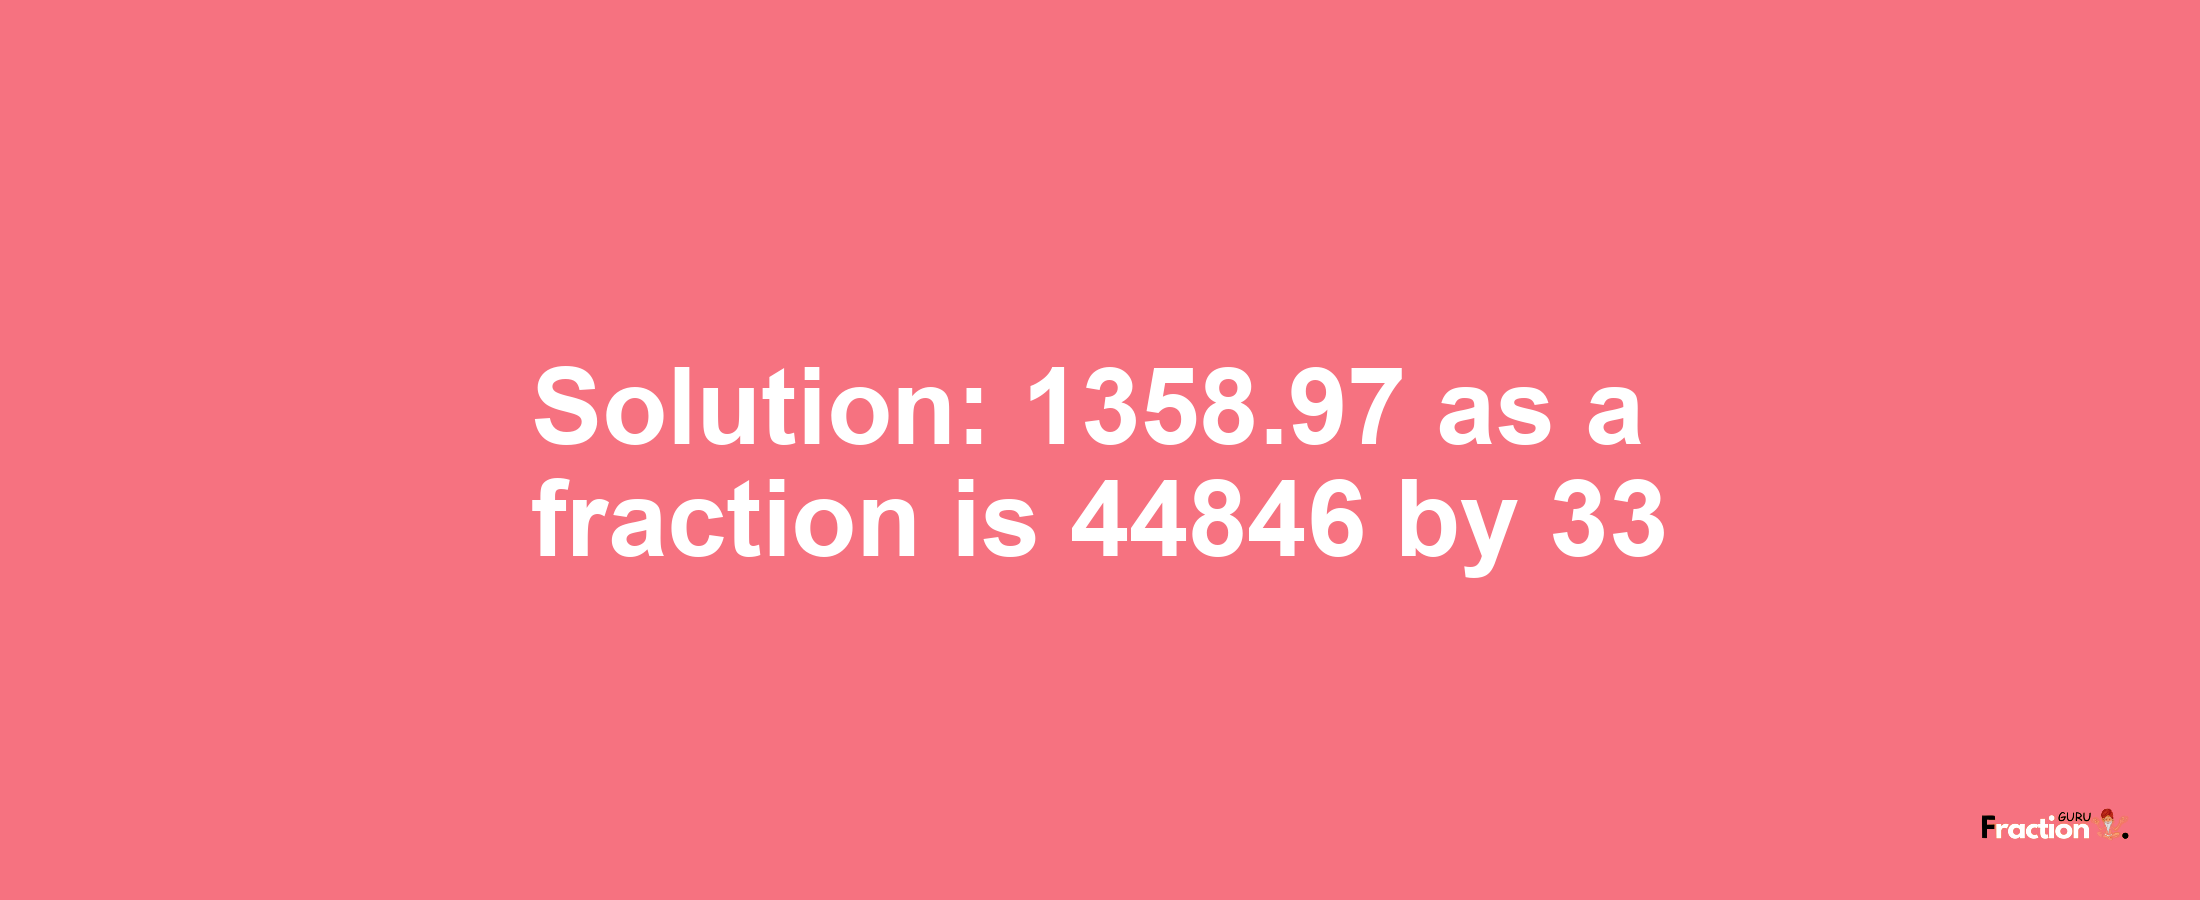 Solution:1358.97 as a fraction is 44846/33